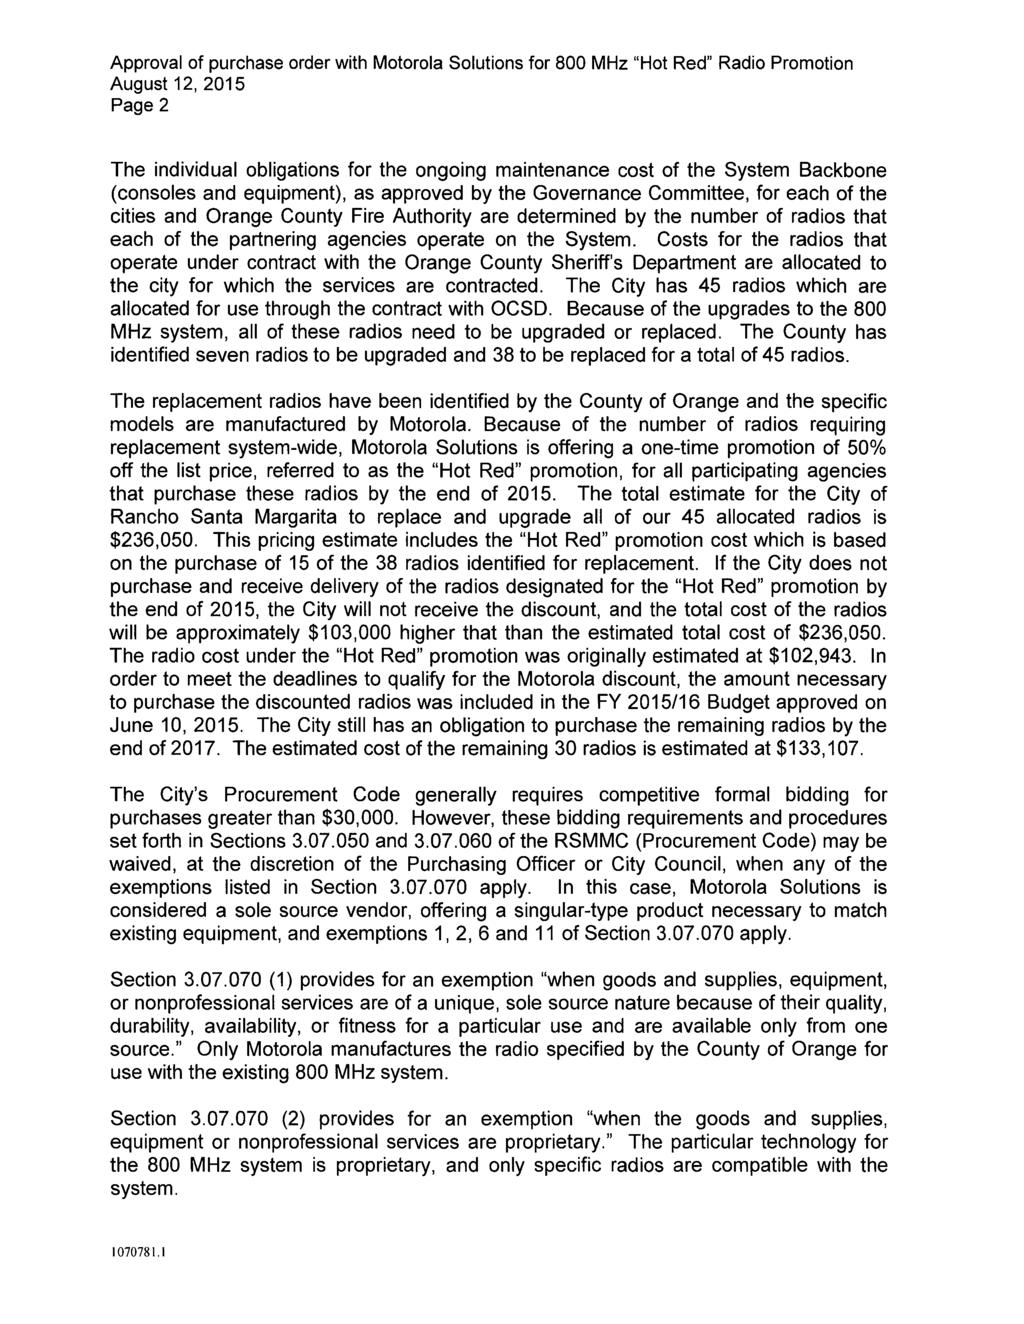 Page 2 Approval of purchase order with Motorola Solutions for 800 MHz "Hot Red" Radio Promotion August 12, 2015 Page 2 The individual obligations for the ongoing maintenance cost of the System